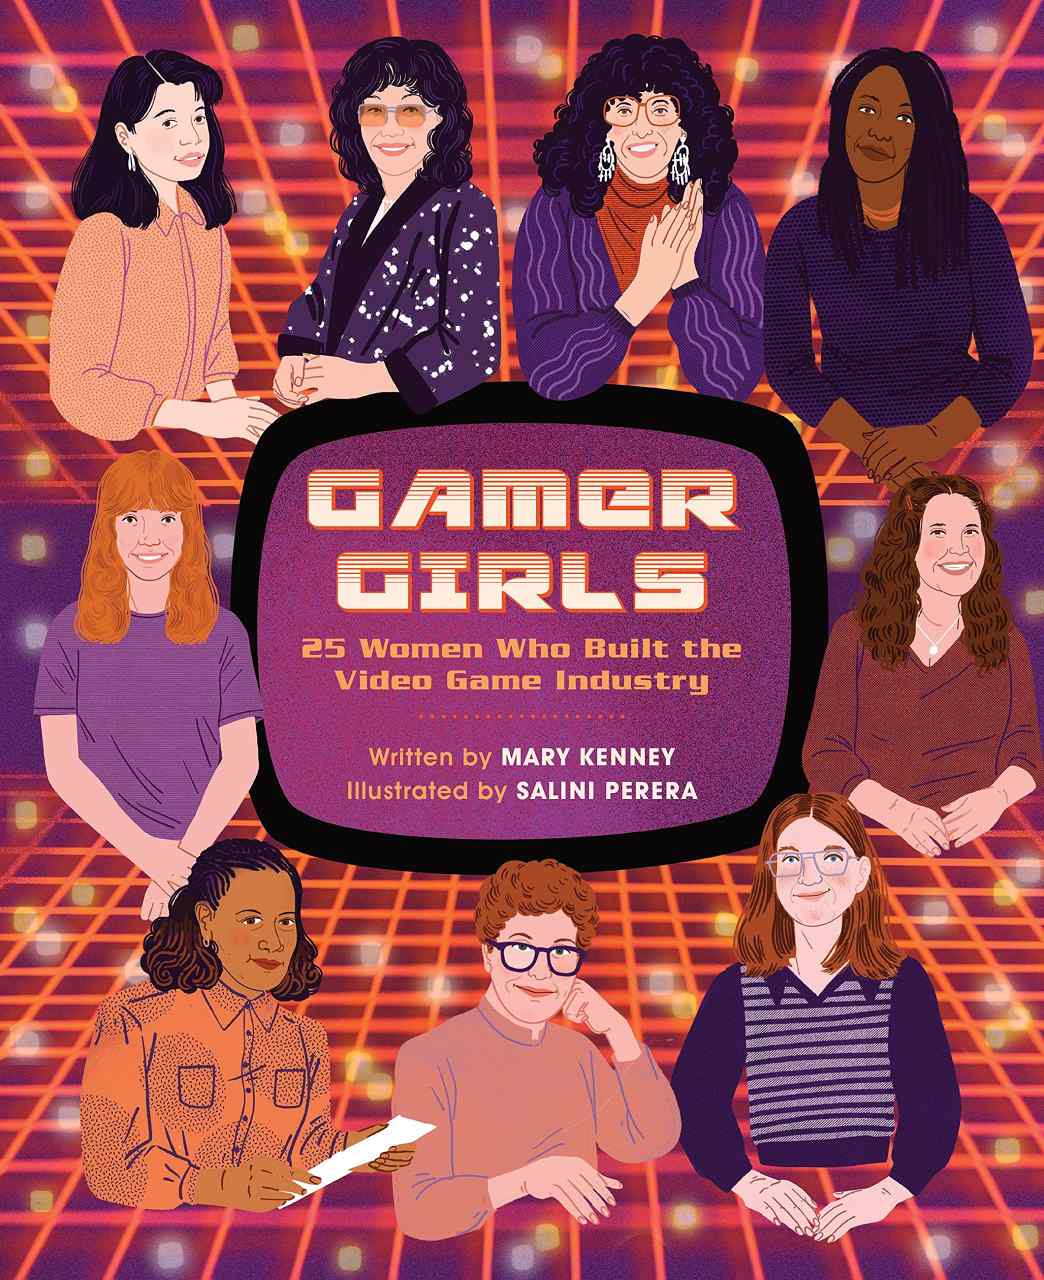 illustrations of nine women on a gridded purple and red background, surrounded the book title 'gamer girls: 25 women who built the video game industry, written by mary kenney, illustrated by salini perera'